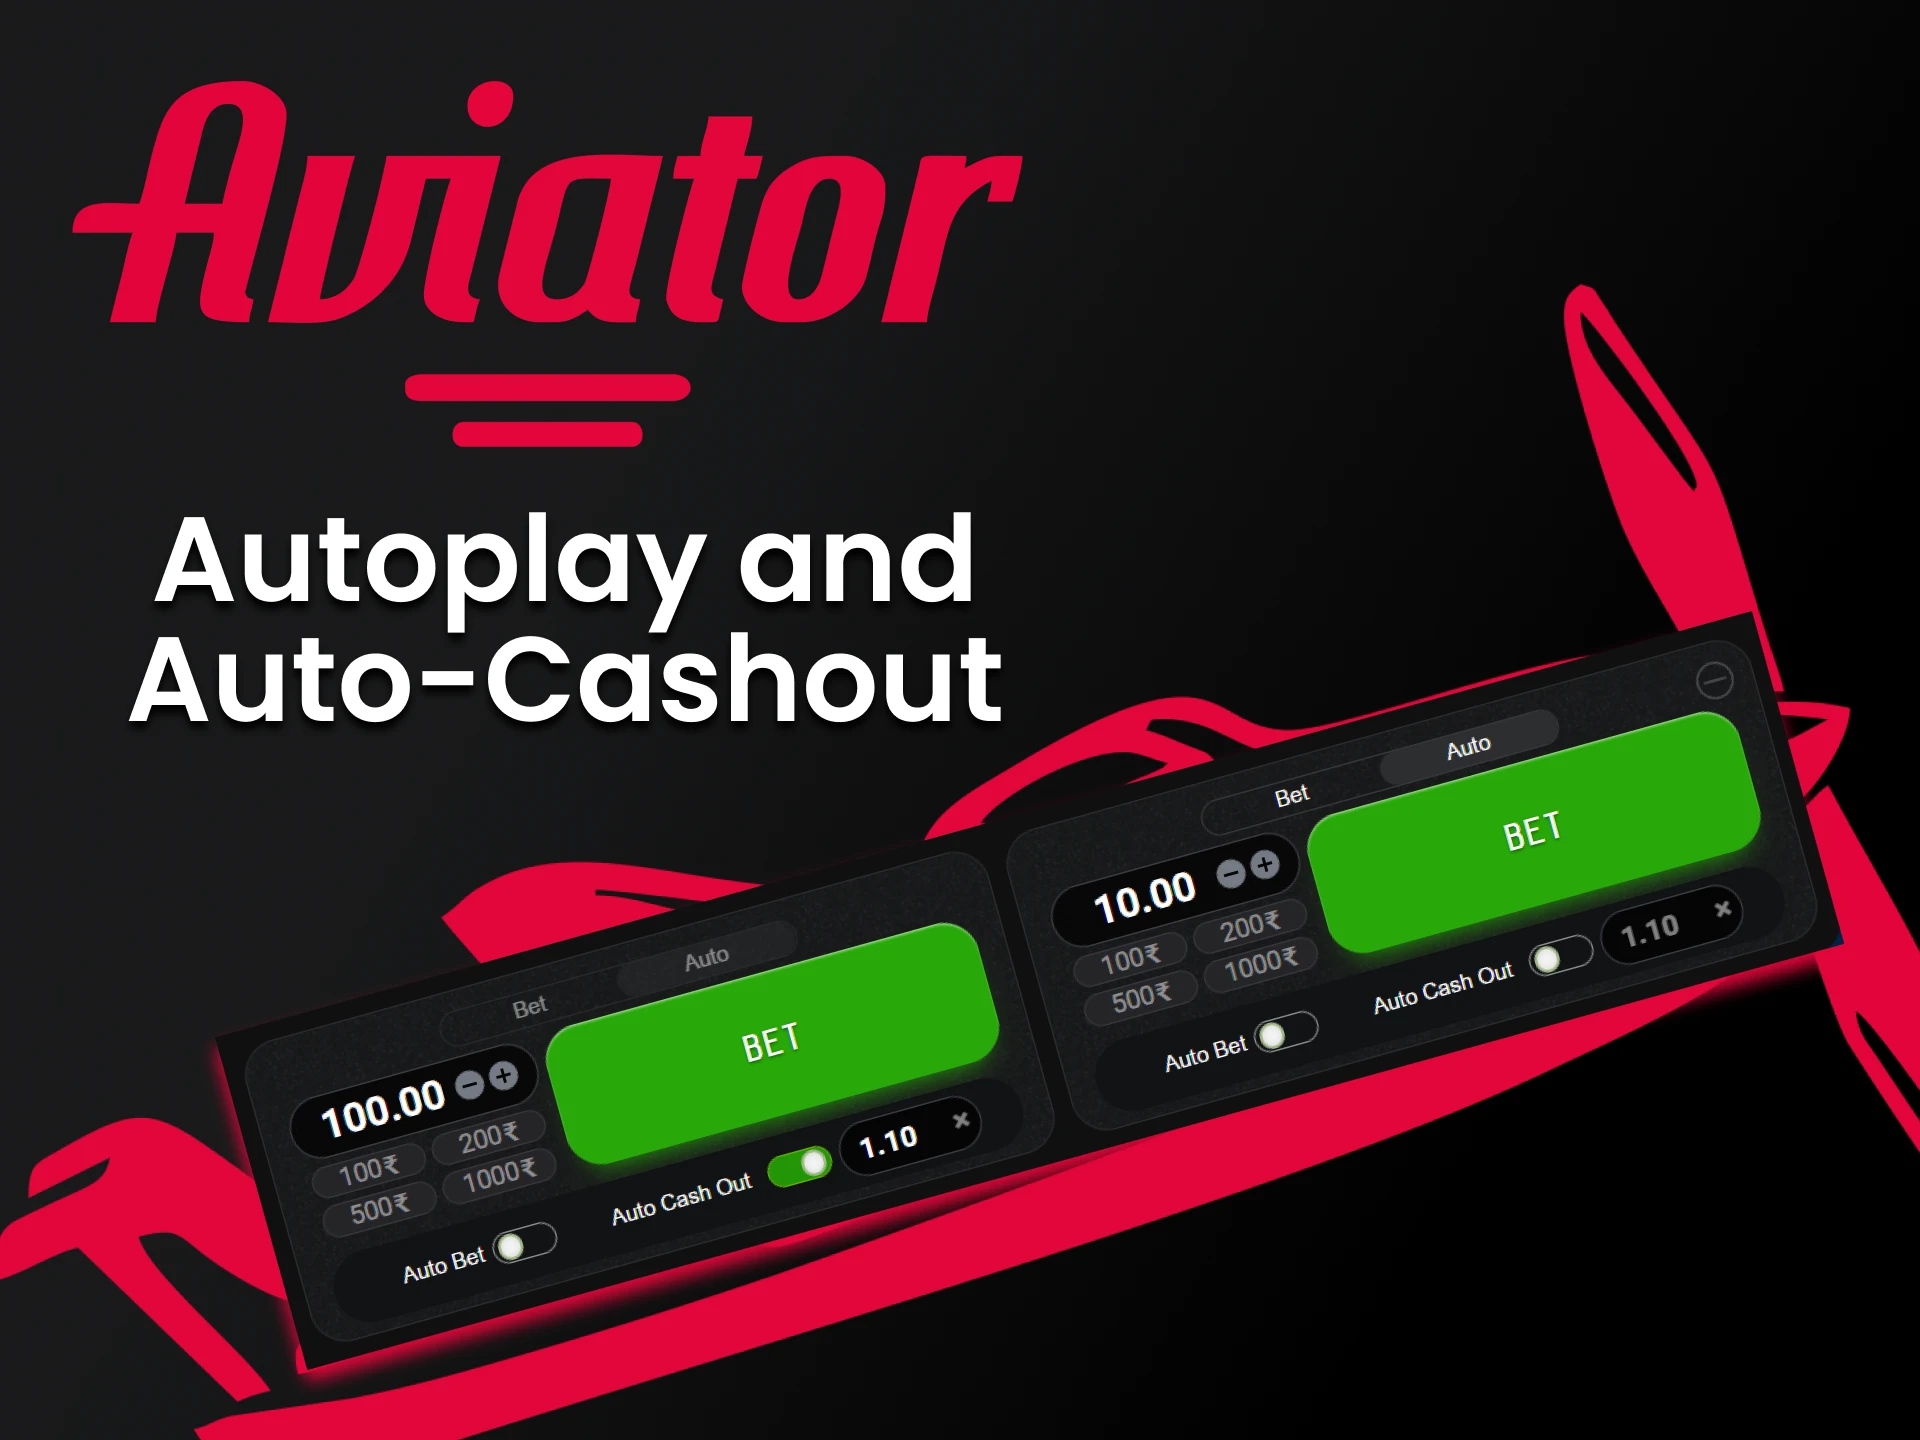 You can set automatic bets and withdrawals in the Aviator game.